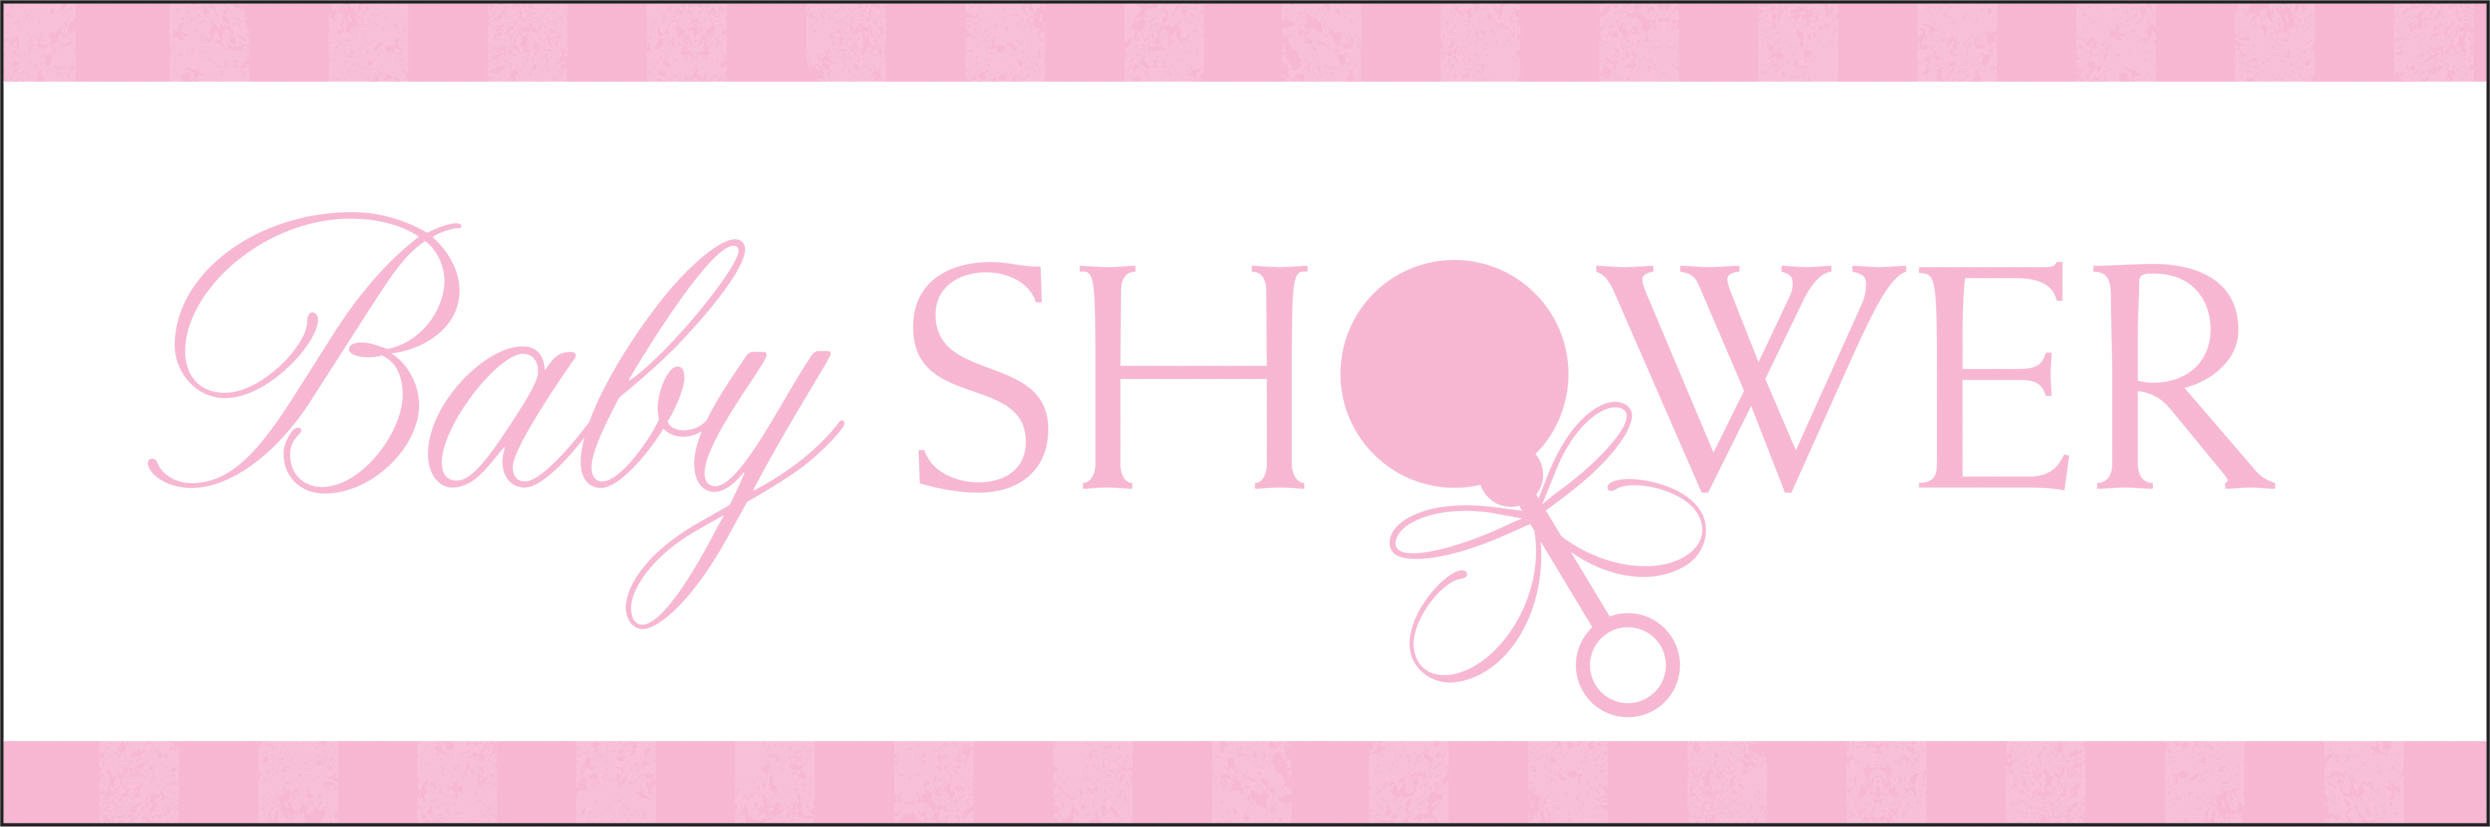 free baby shower banner clipart - photo #42